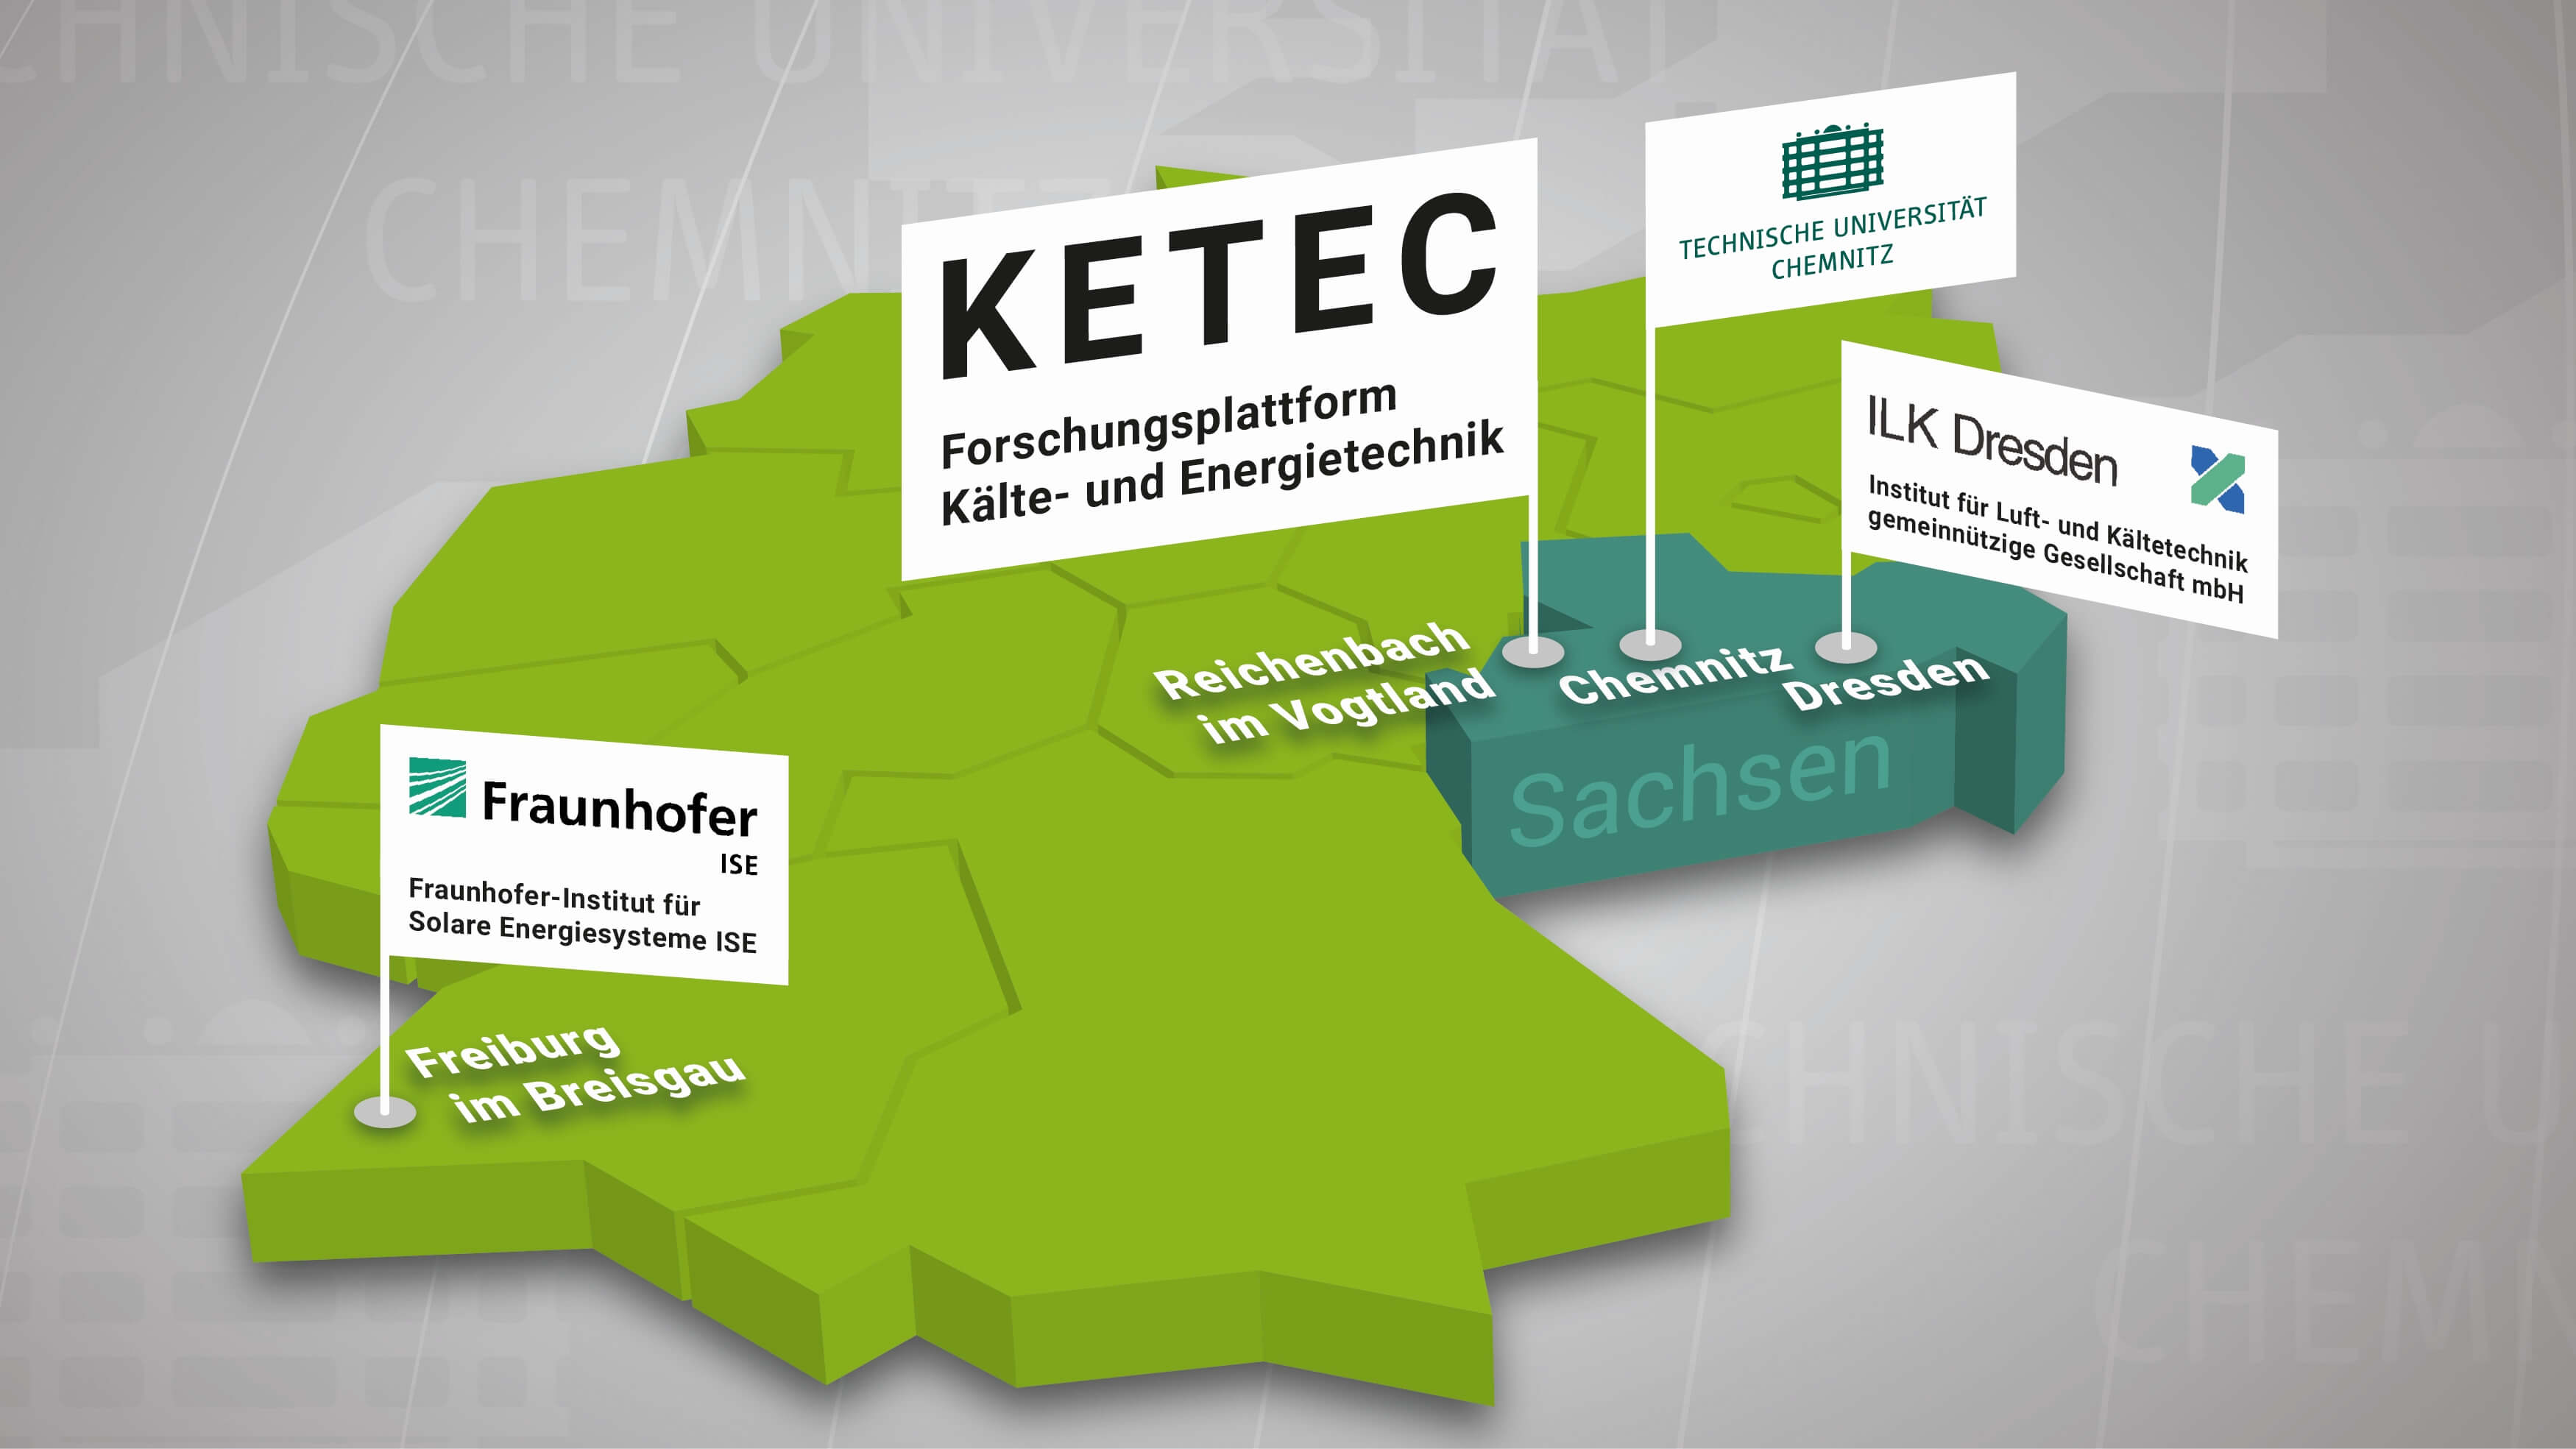 Partners and location of the KETEC research partners involved